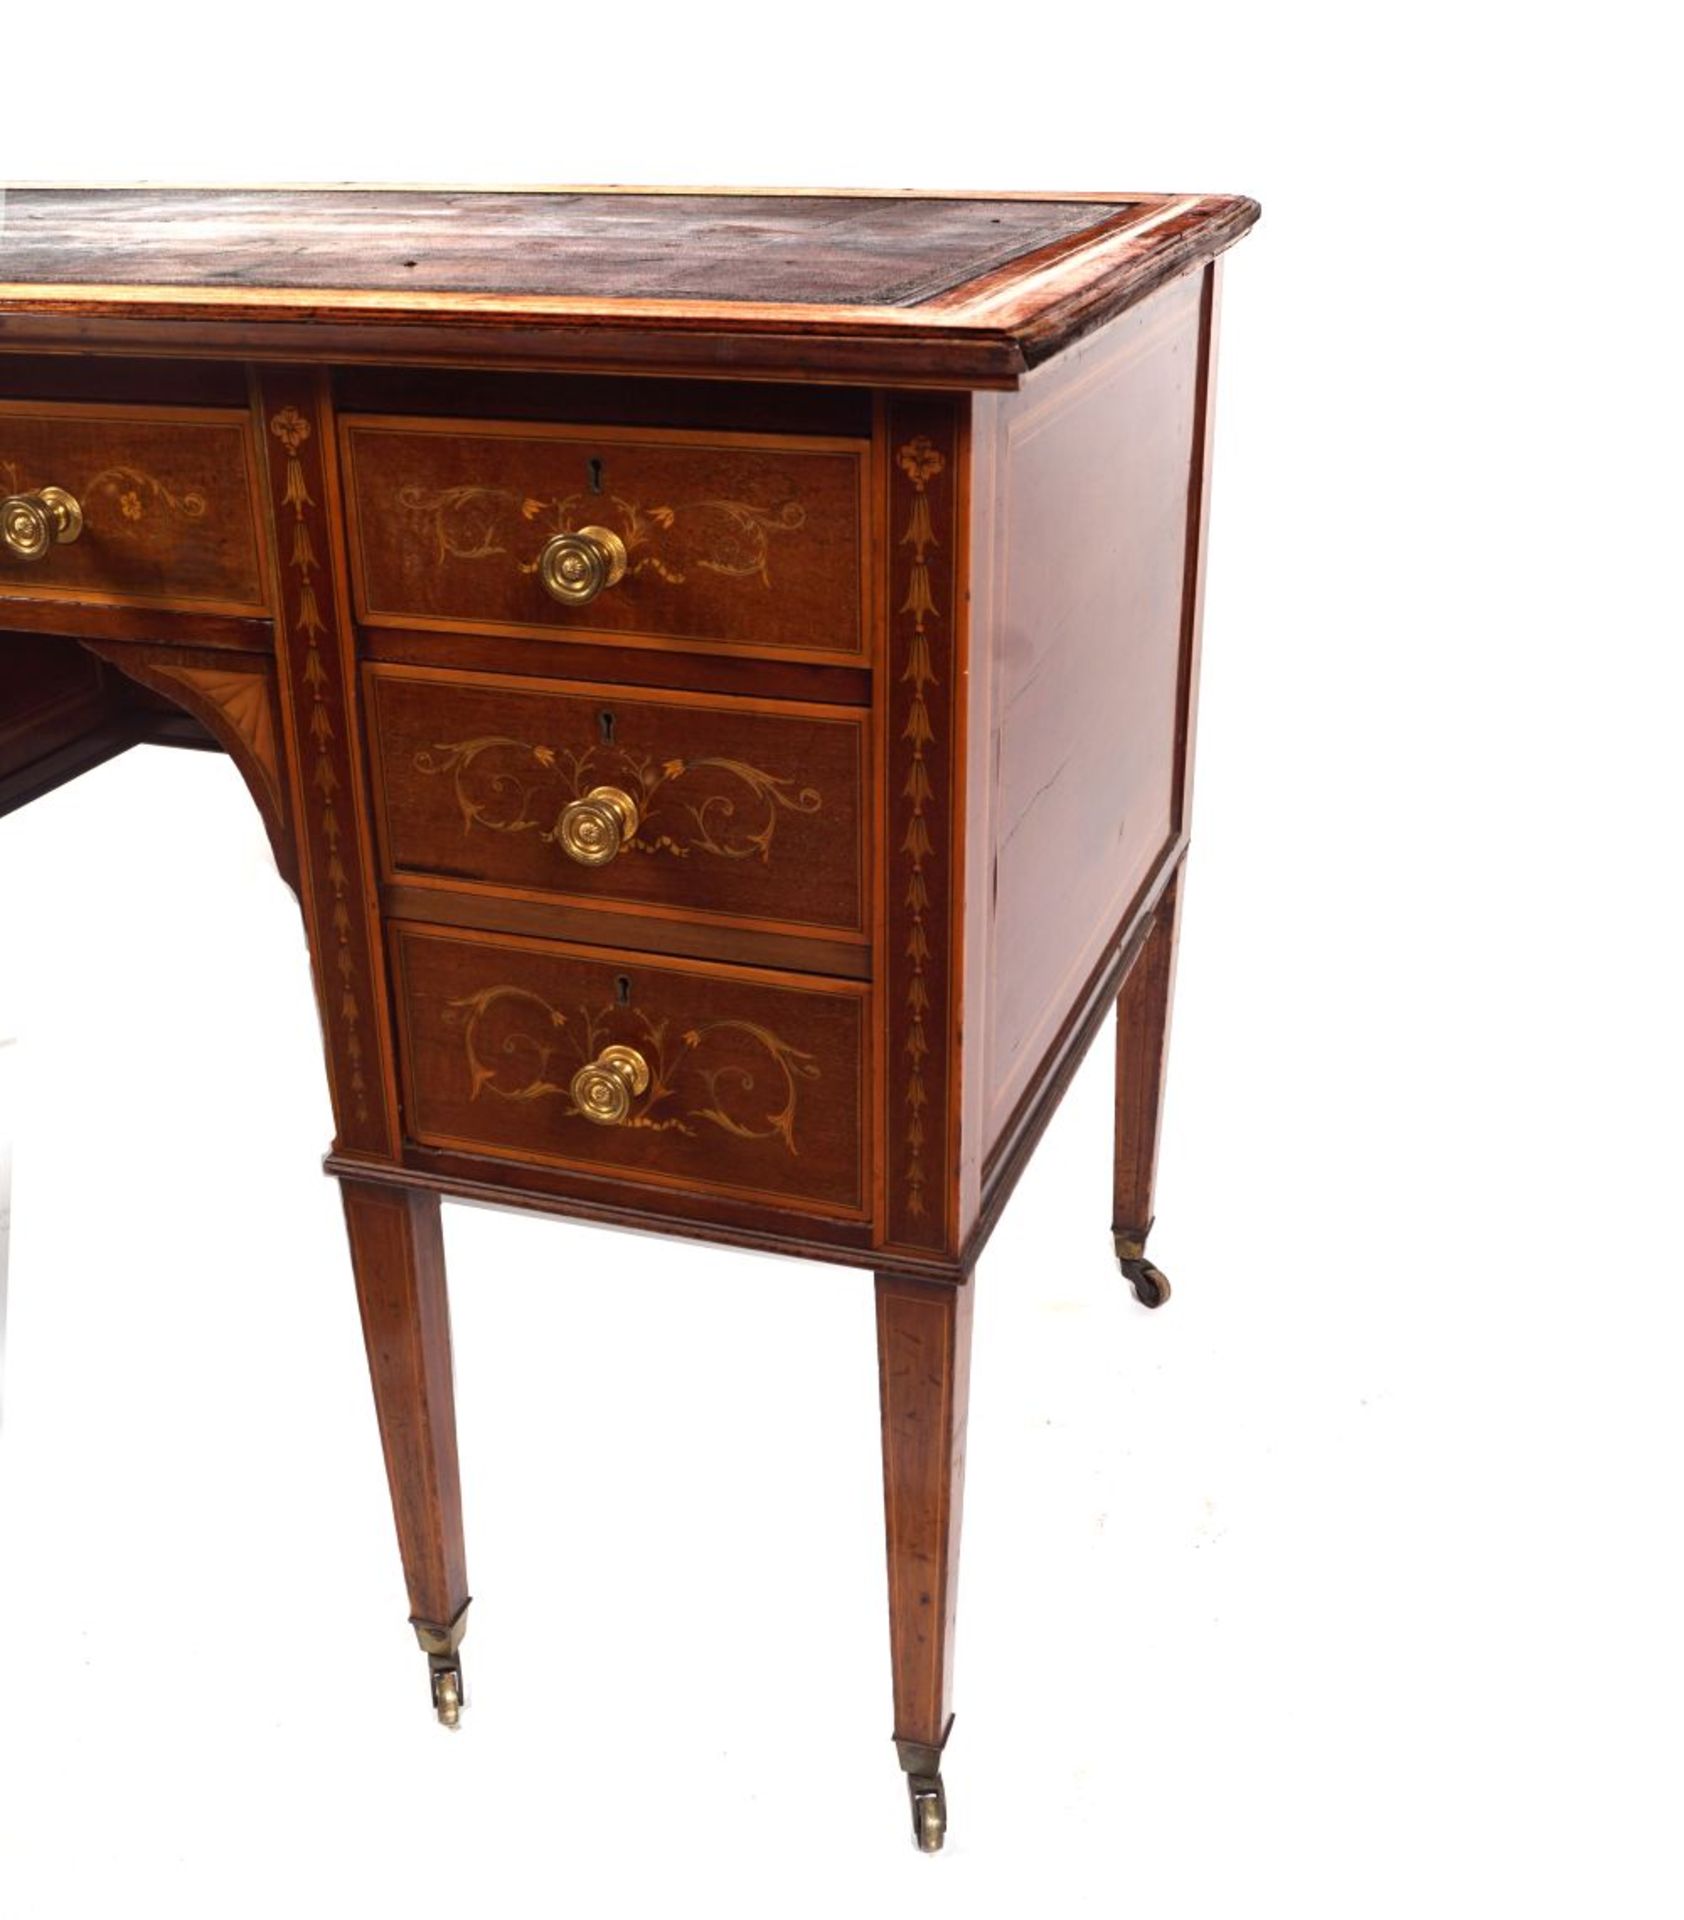 SIGNED EDWARDS & ROBERTS MARQUETRY DESK - Image 2 of 3